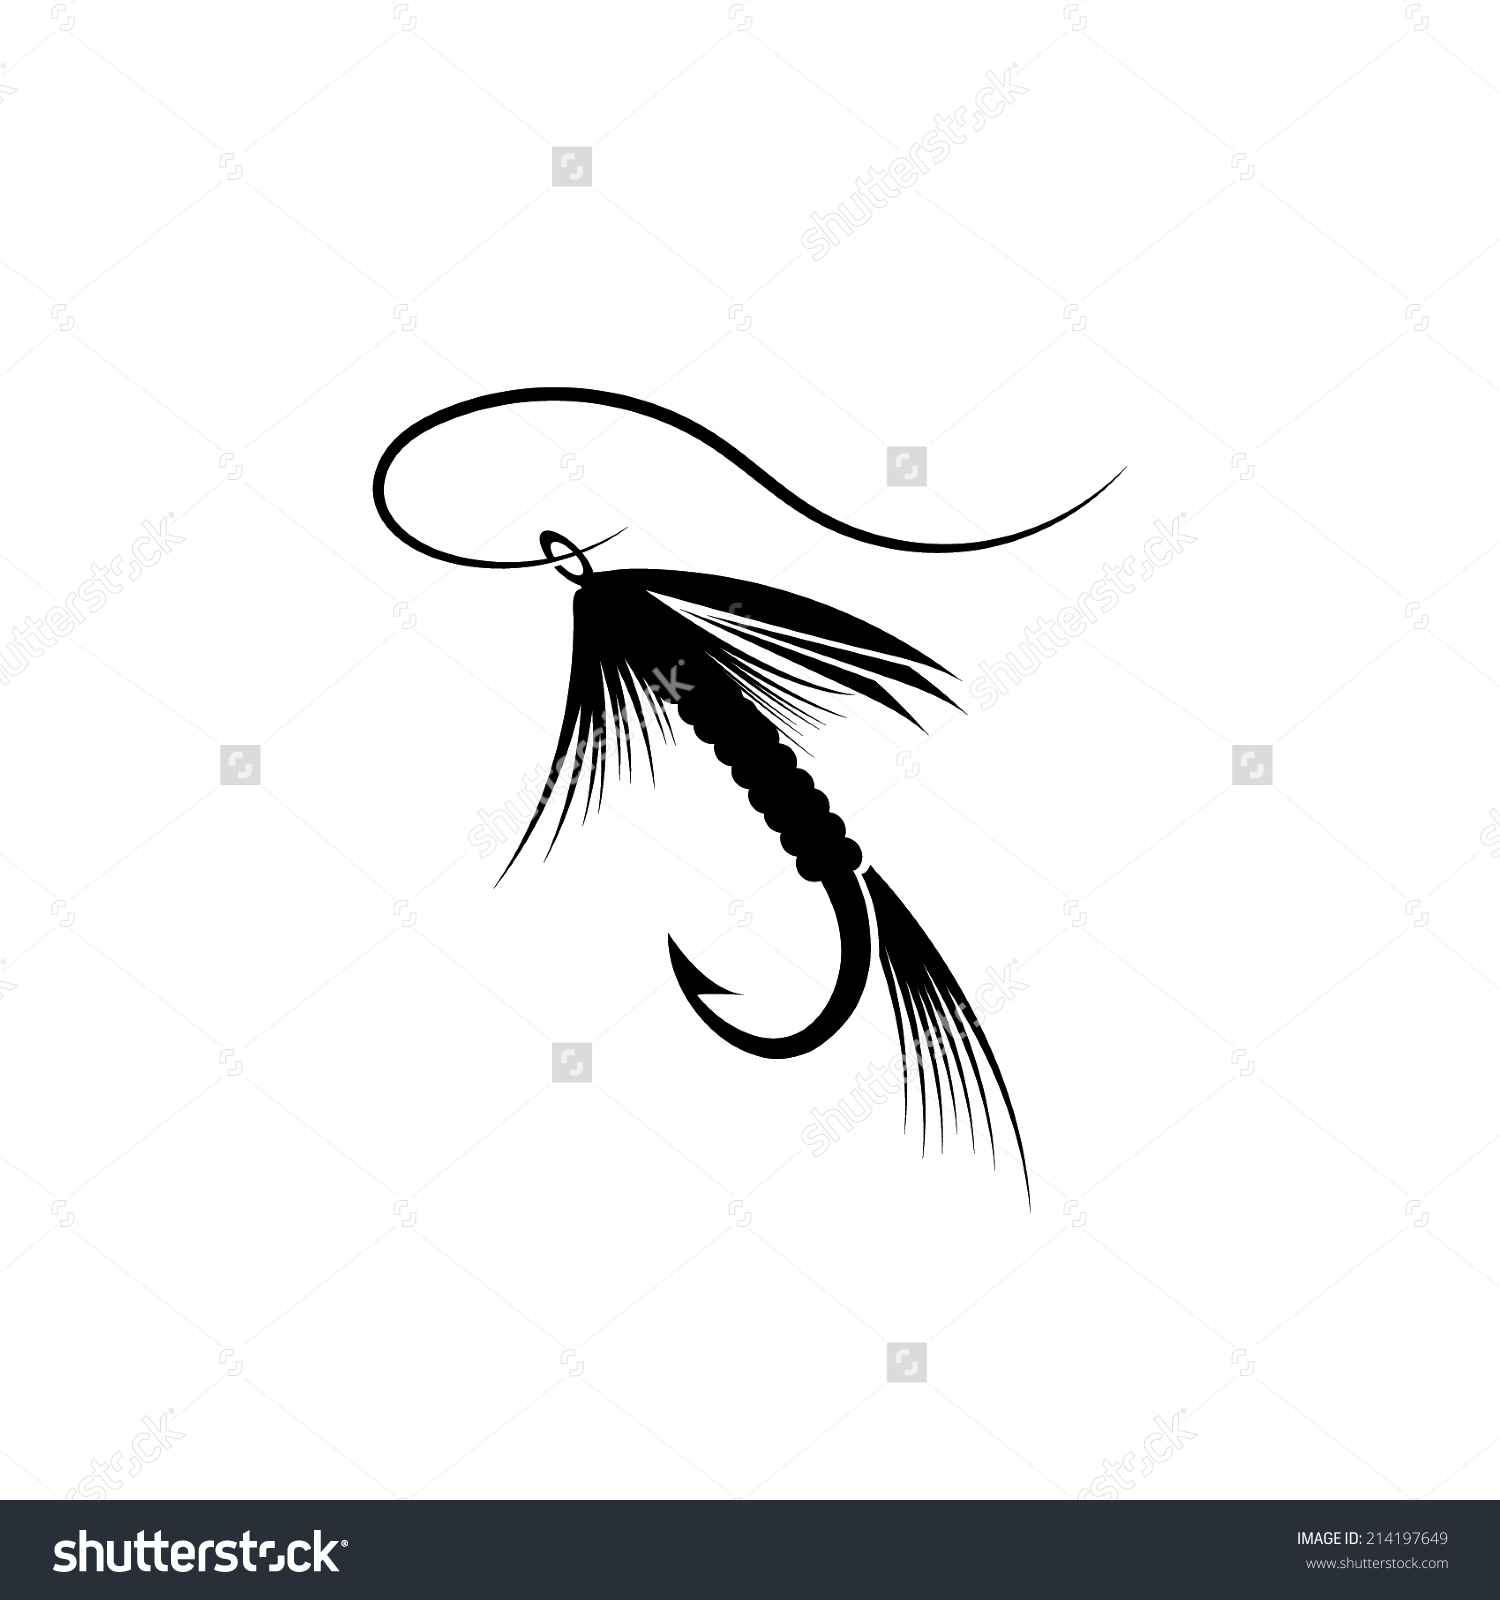 Download Lures clipart 20 free Cliparts | Download images on ...